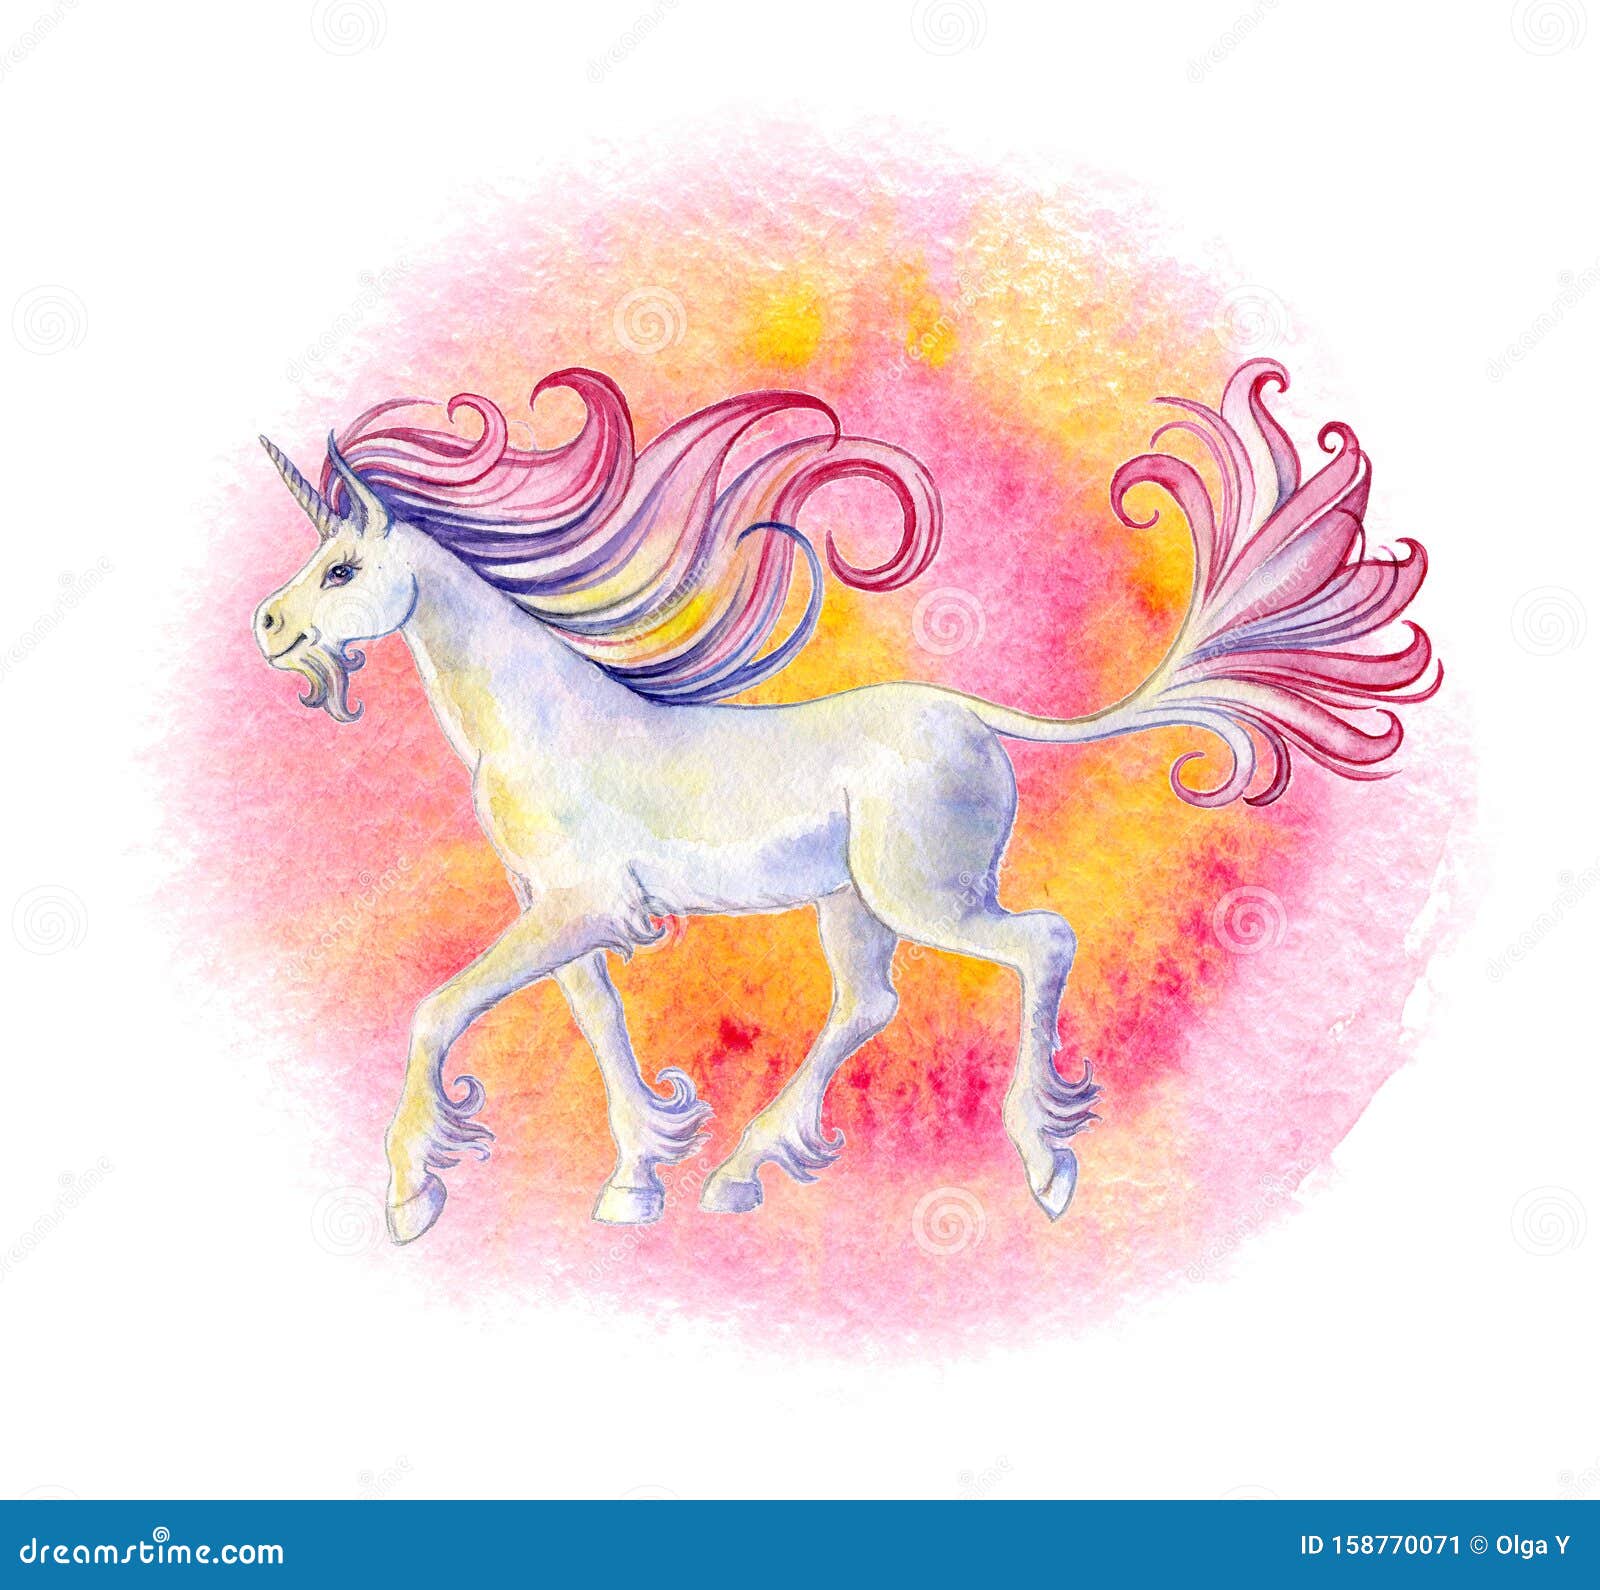 Walking Unicorn with Flowing Mane and Tail Against of a Spiral Pink ...